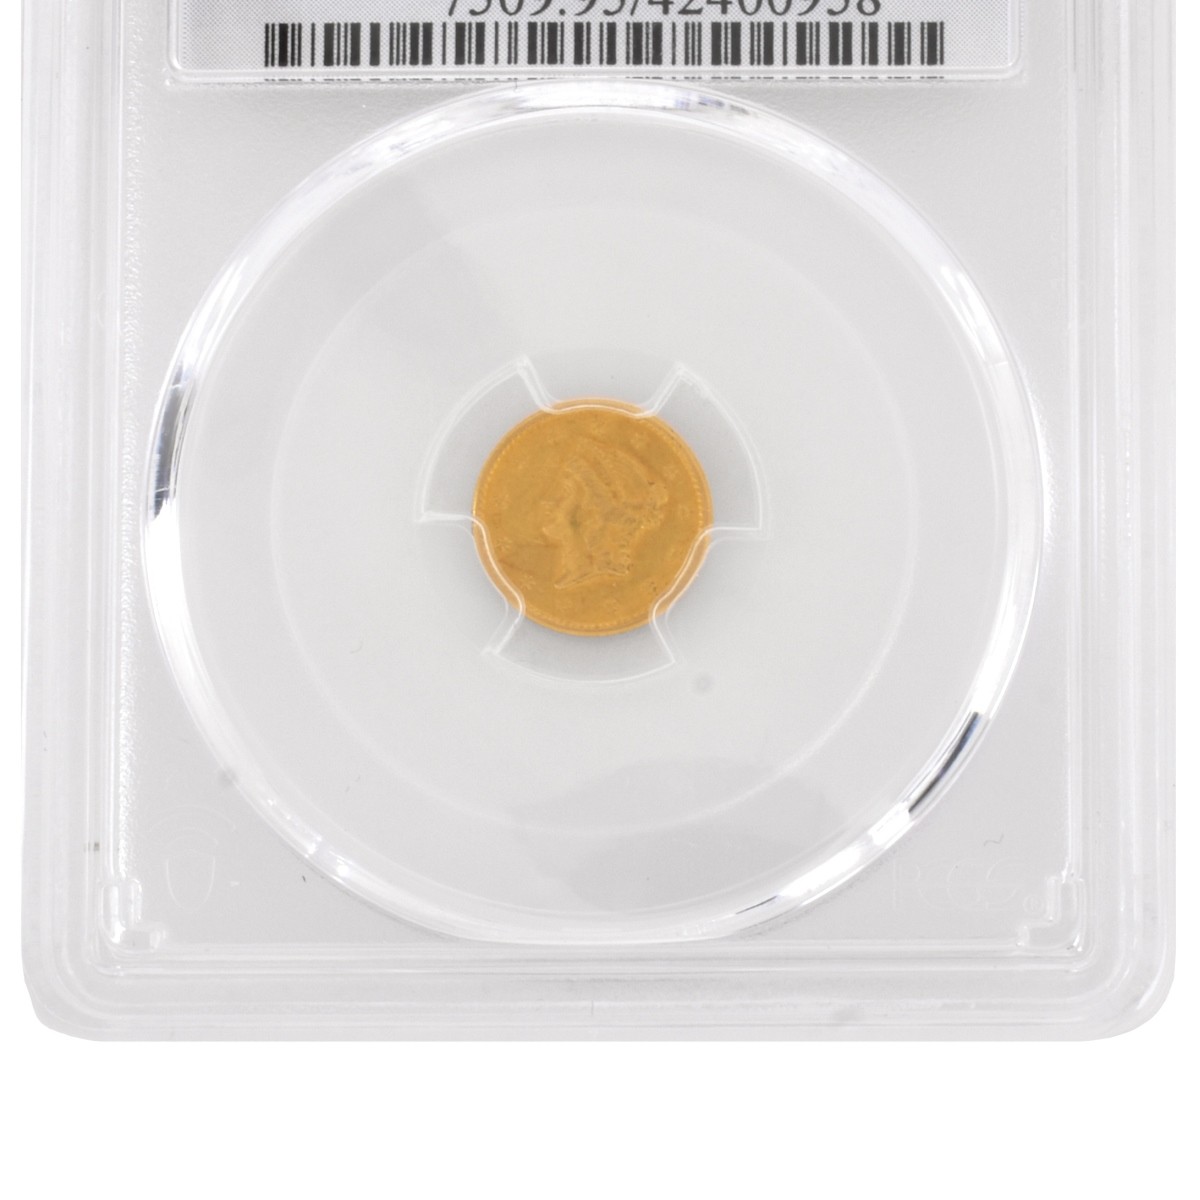 1850 US $1 Gold Coin